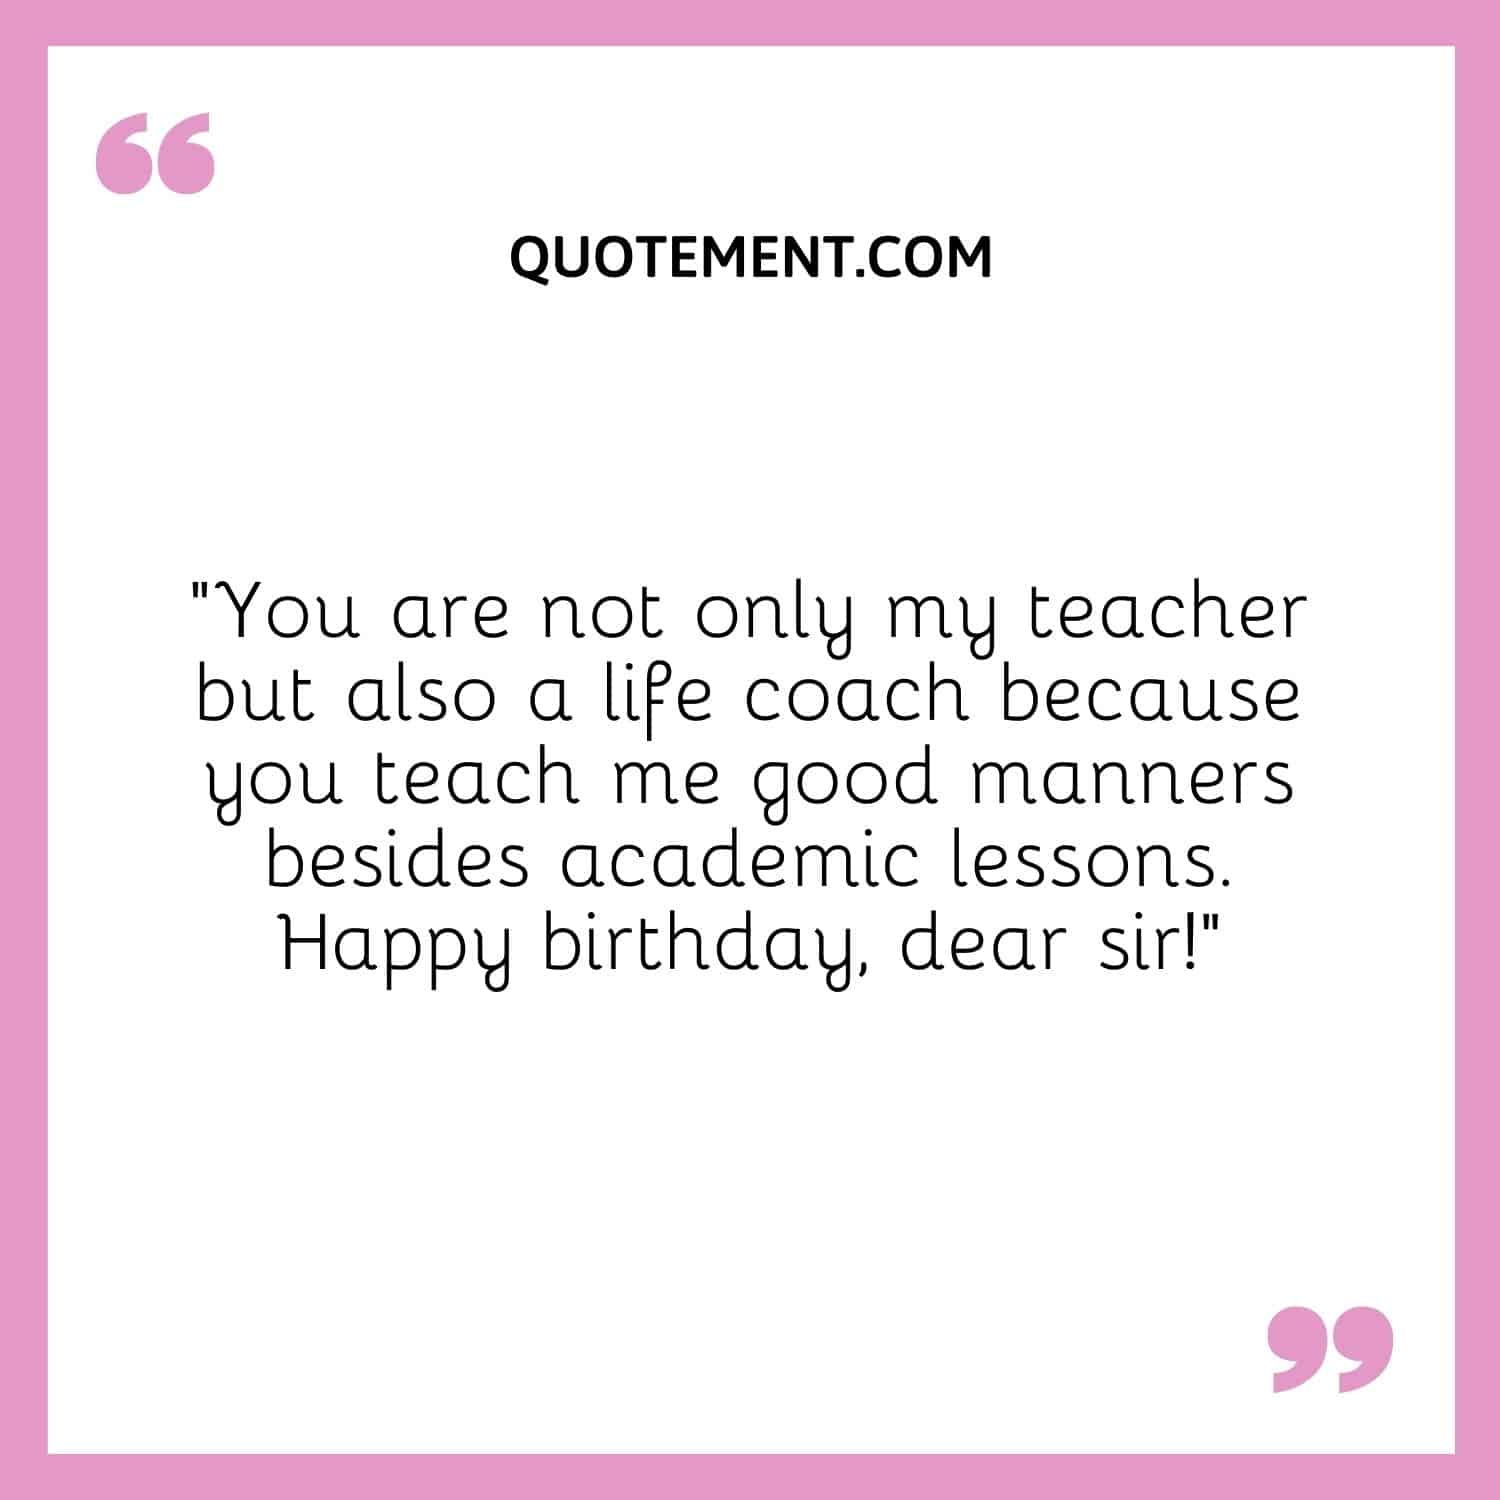 You are not only my teacher but also a life coach because you teach me good manners besides academic lessons